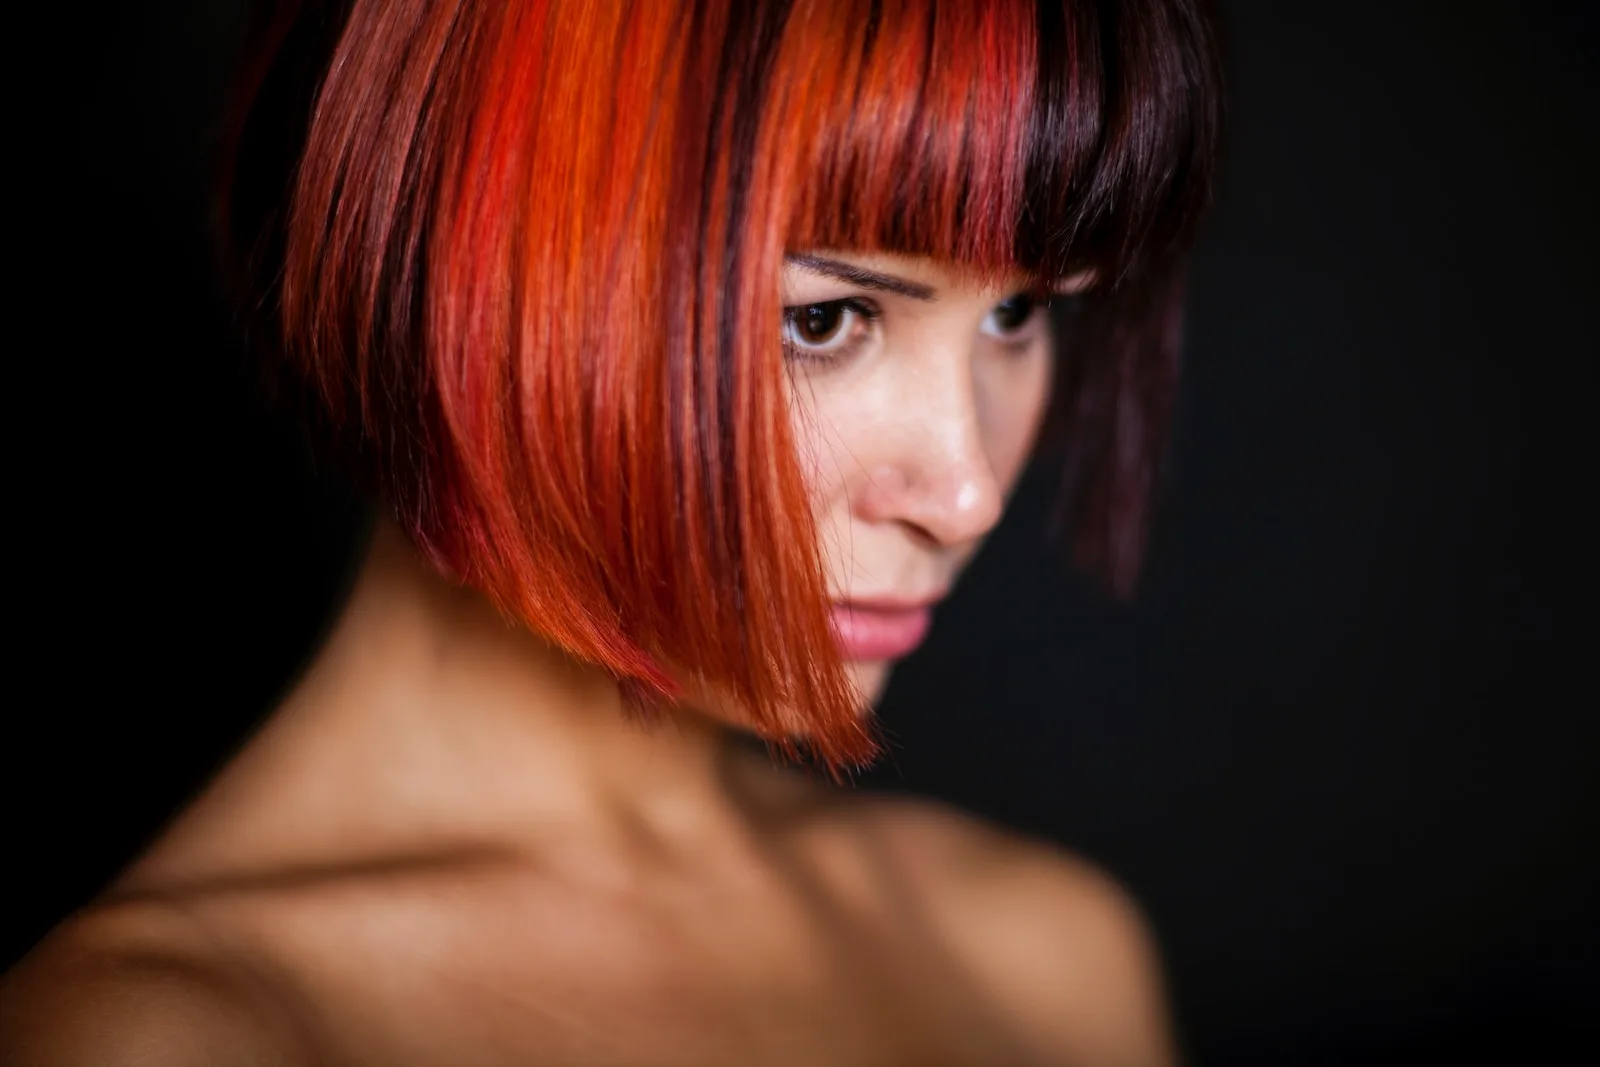 person with fiery red to blonde ombre hair against dark background